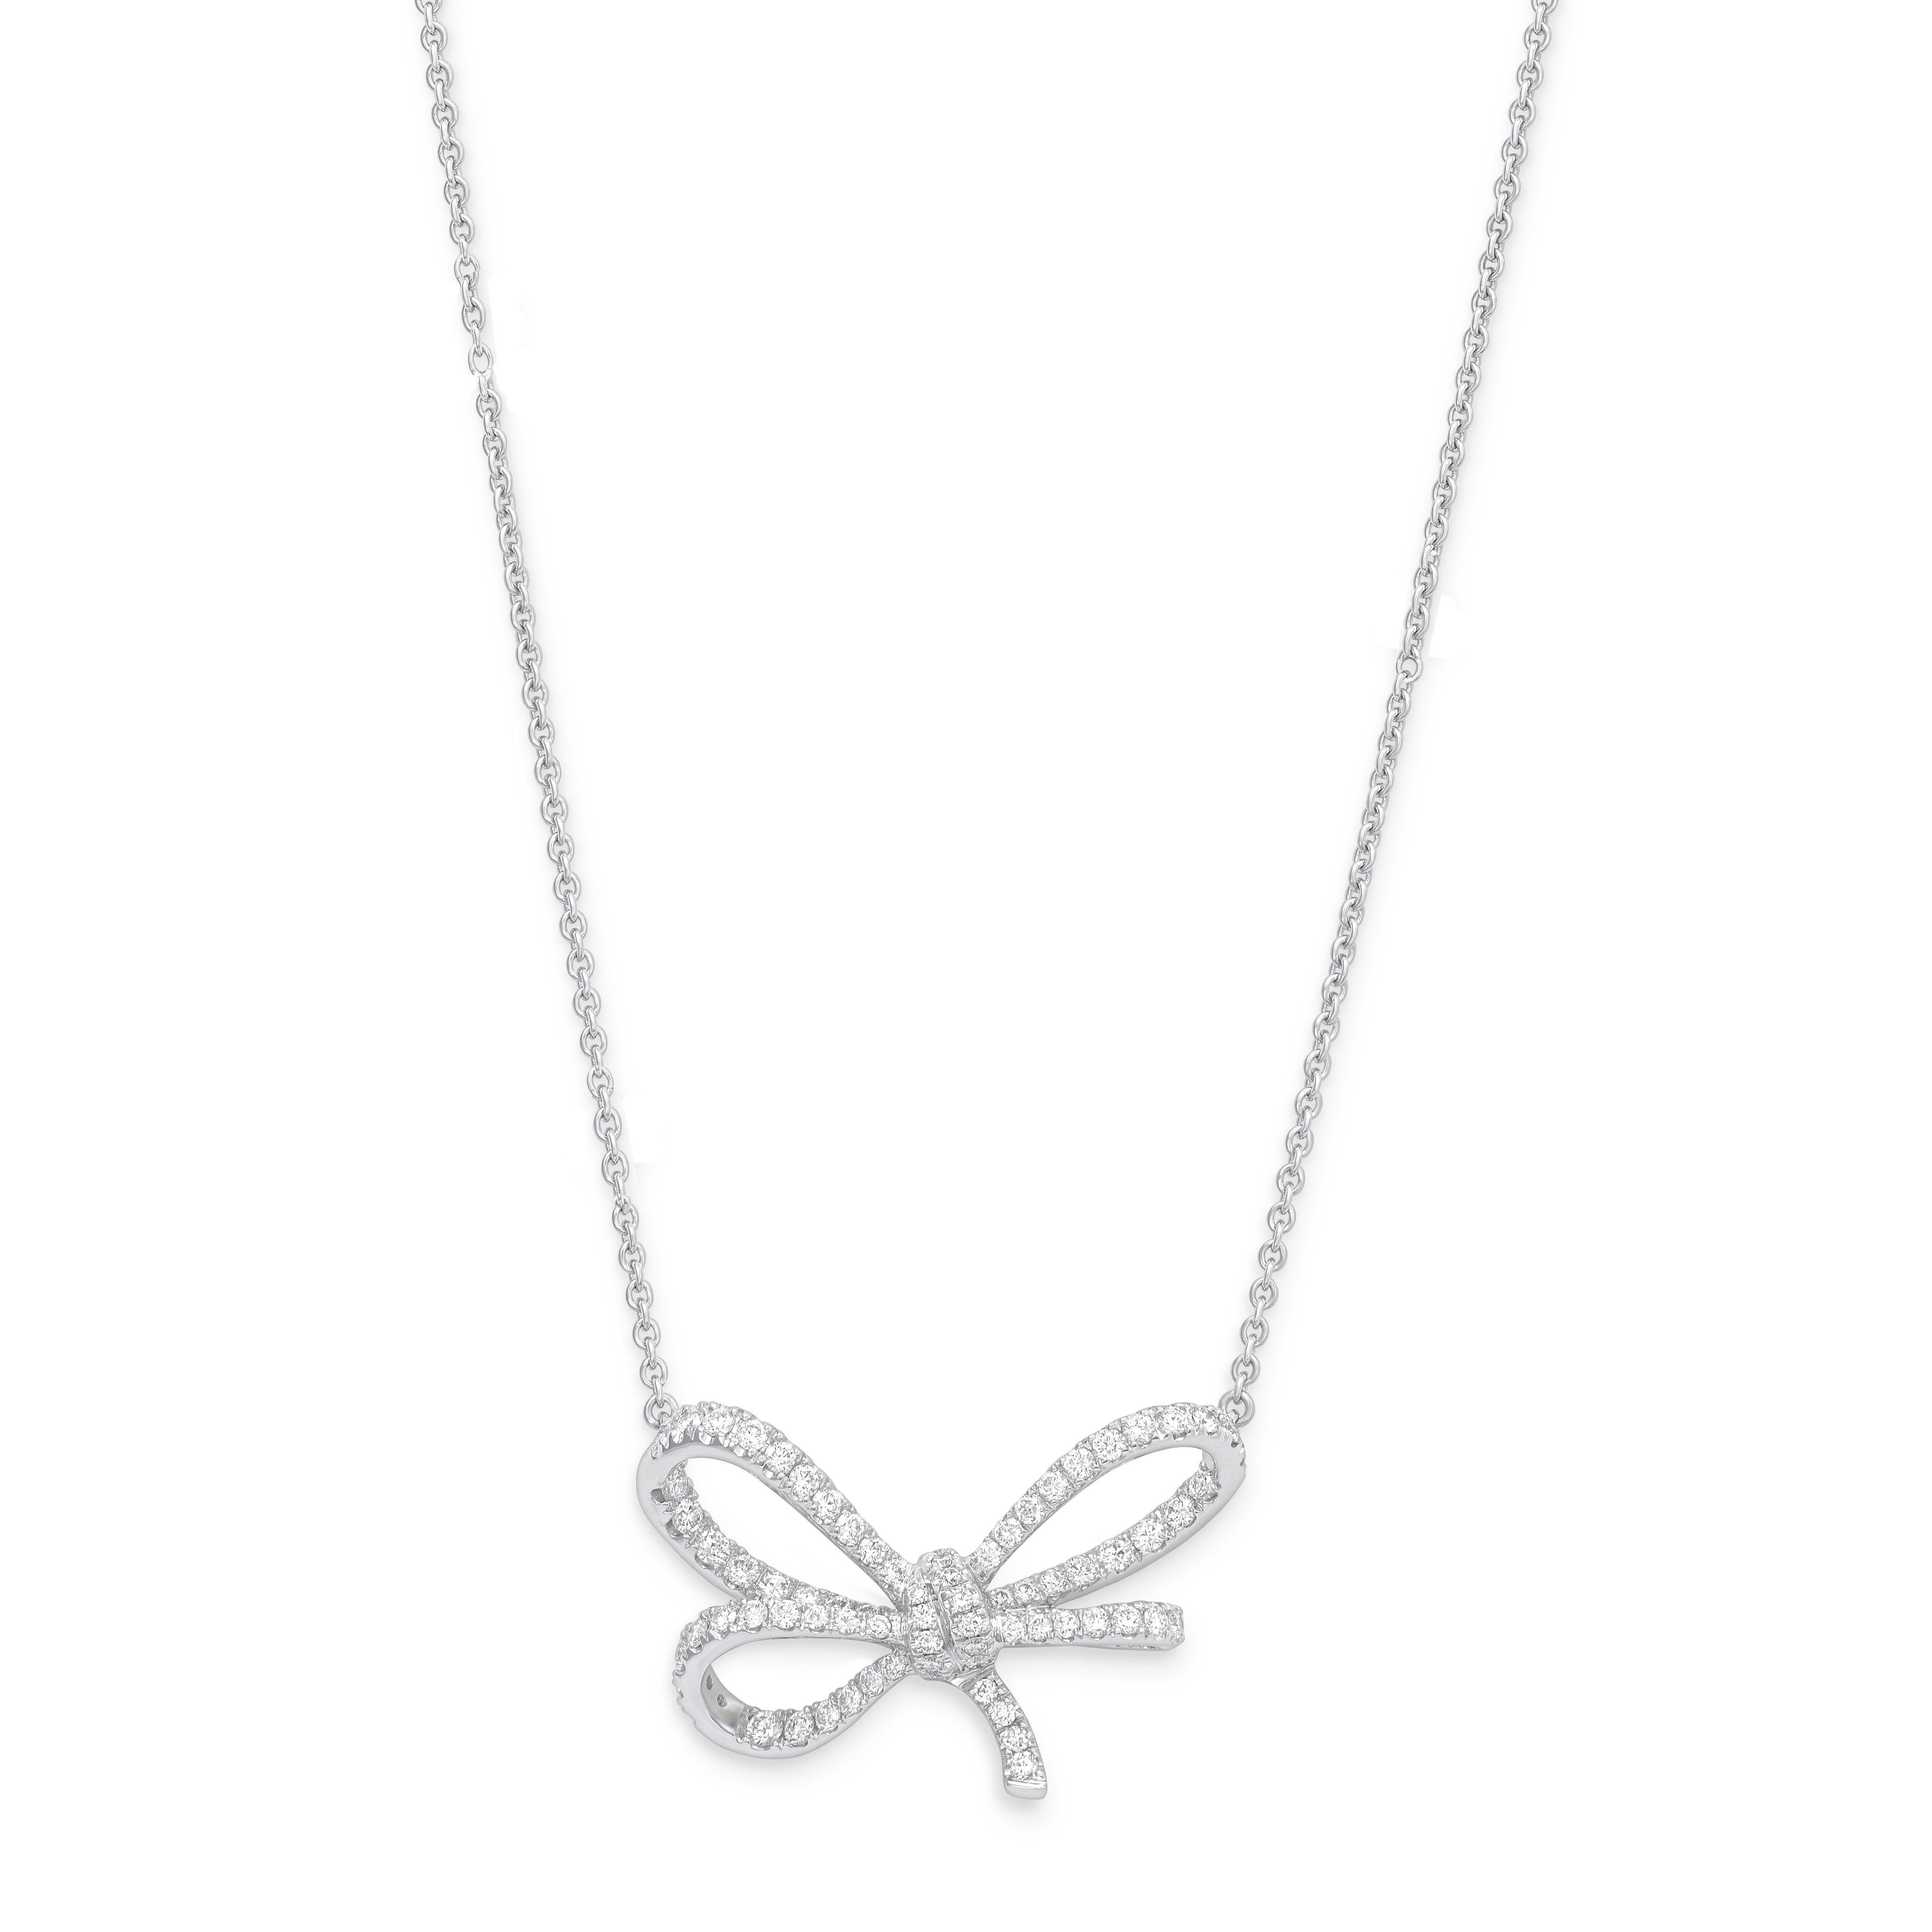 Lyla’s Bow is the first collection designed by Vania Leles.
Embodying the spirit of VANLELES’ design, this collection is feminine and timeless, a must have for jewellery lovers, and the perfect gift for someone special. Its whimsical style has fast